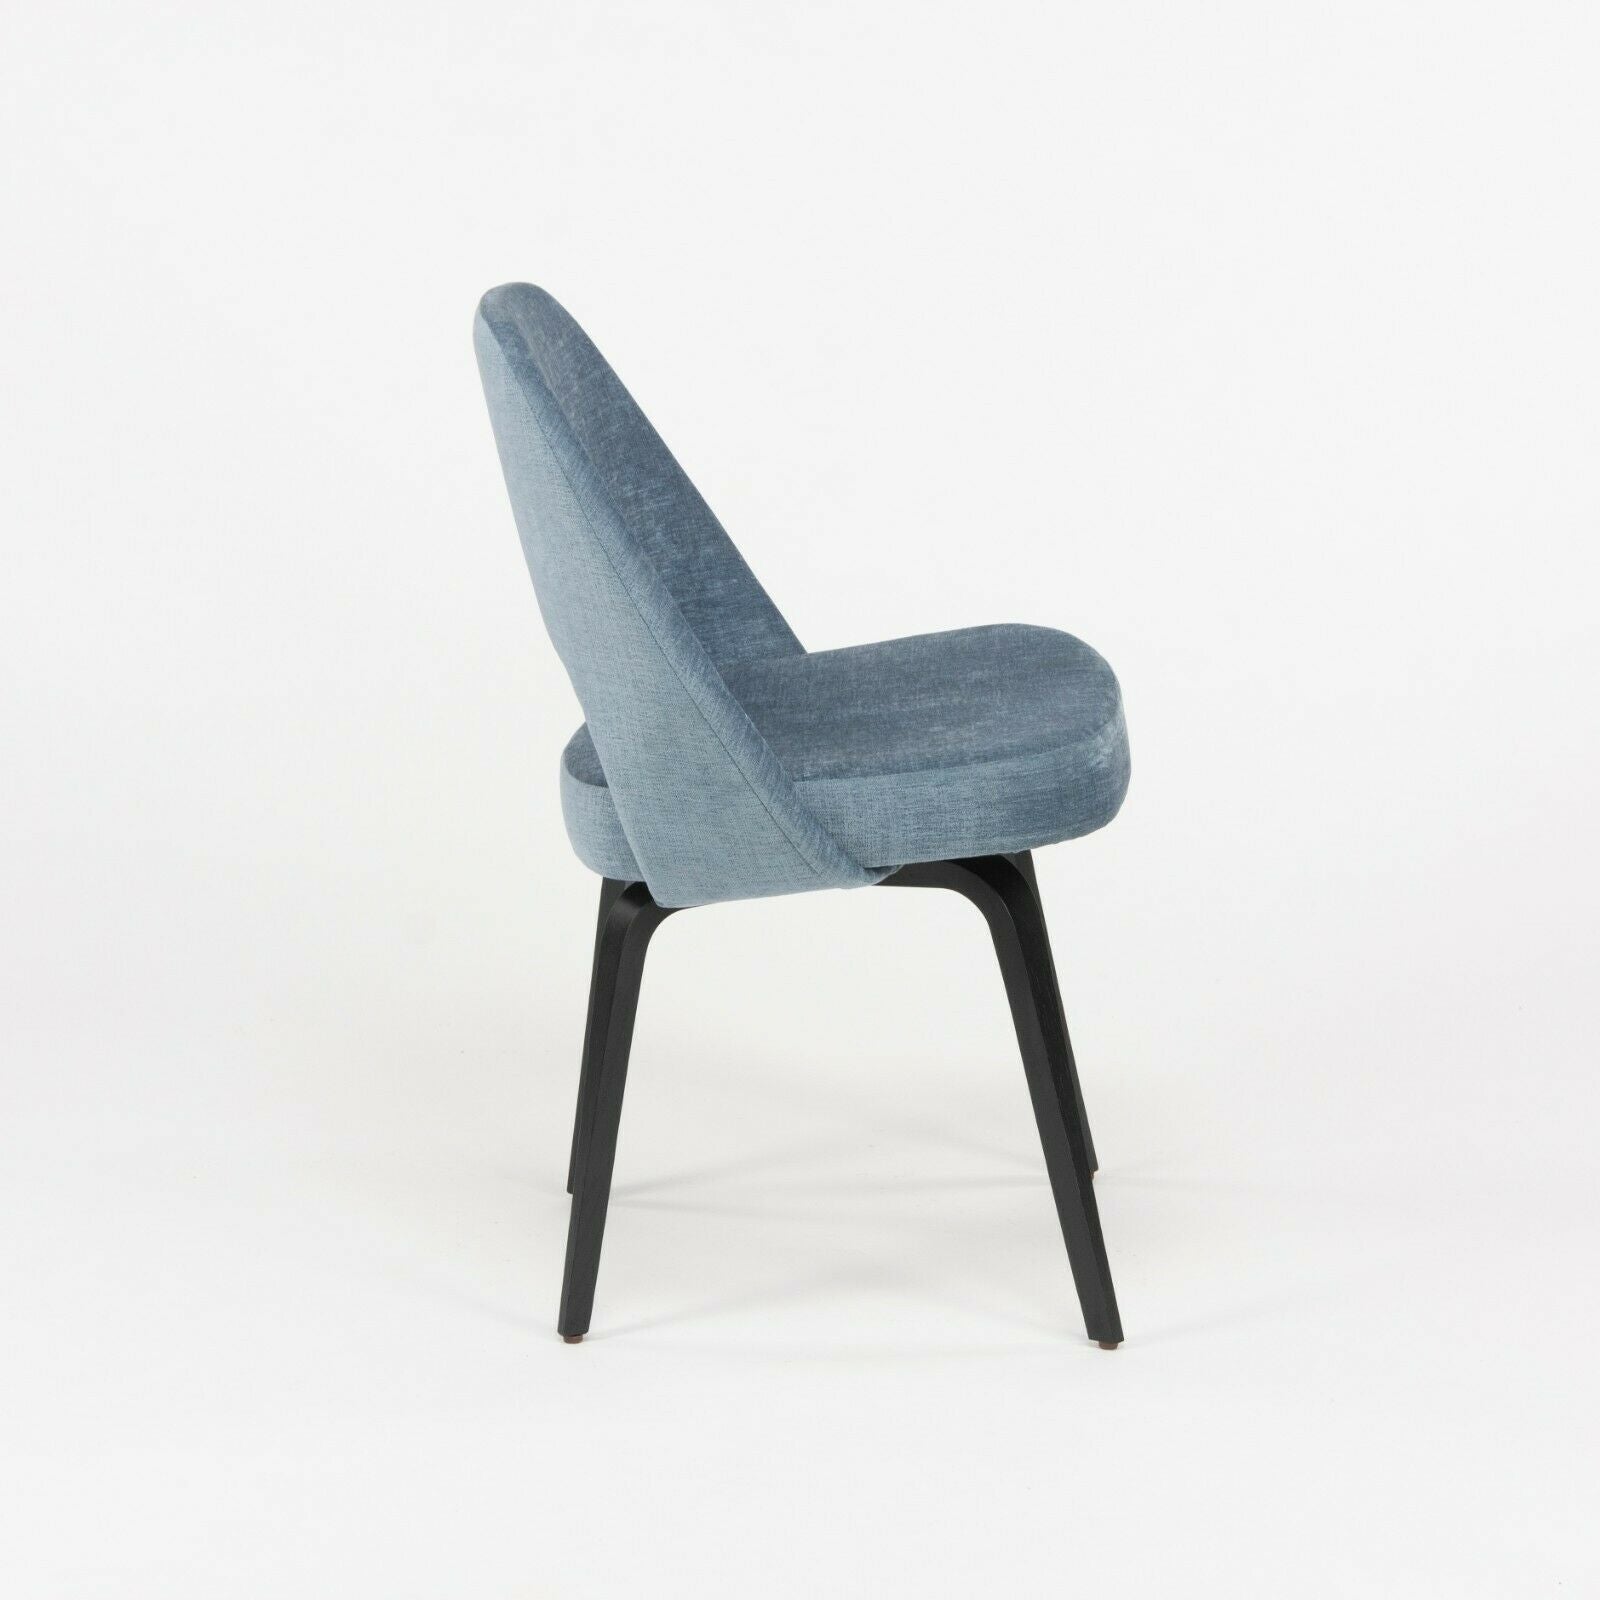 SOLD Blue Chenille 2020 Eero Saarinen Knoll Executive Side Chair with Wood Legs 2x Available